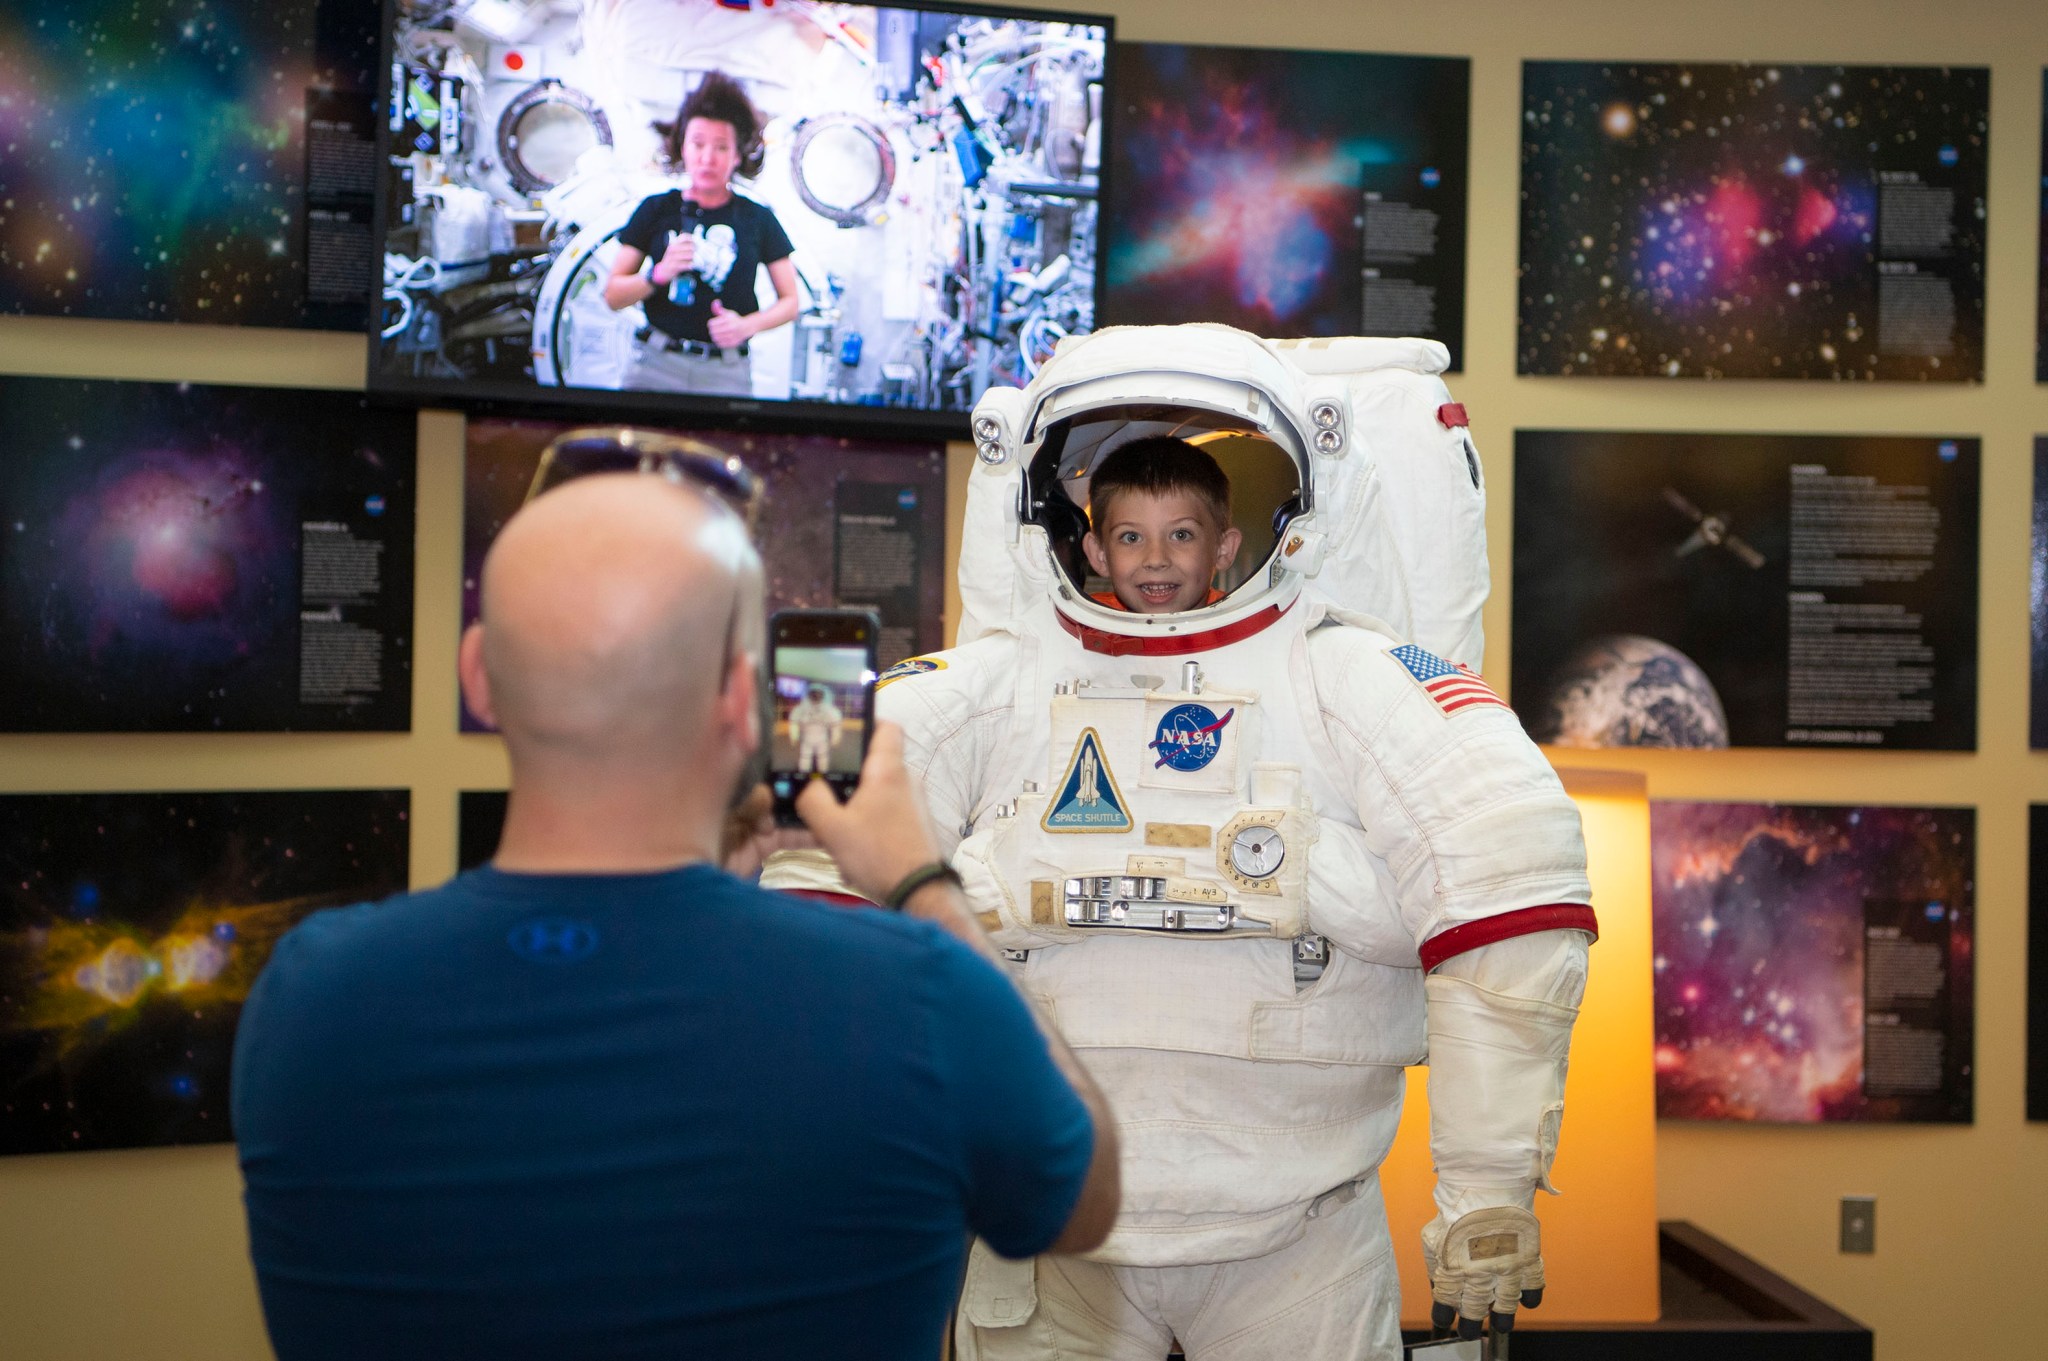 A father takes a picture of his young son posing inside an authentic astronaut suit at the INFINITY Science Center